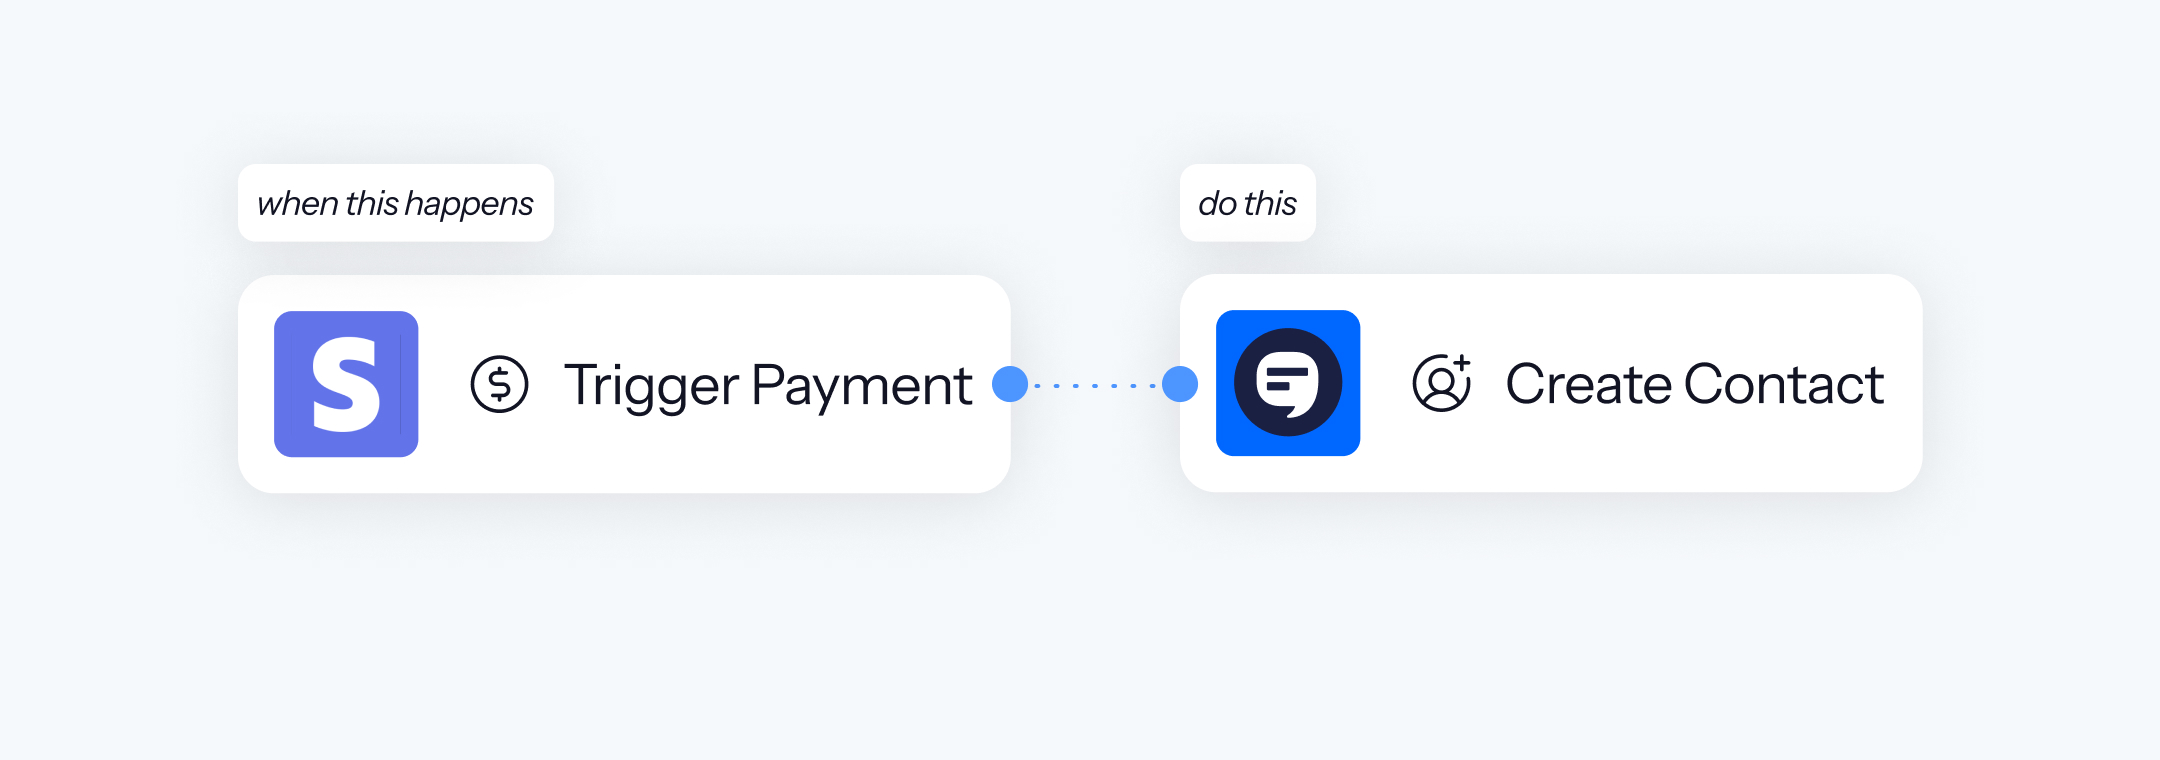 A diagram showing the integration of Stripe's payment processing with a text subscription service, where 'Trigger Payment' leads to 'Create Contact,' indicating an automated workflow for subscription-based transactions.